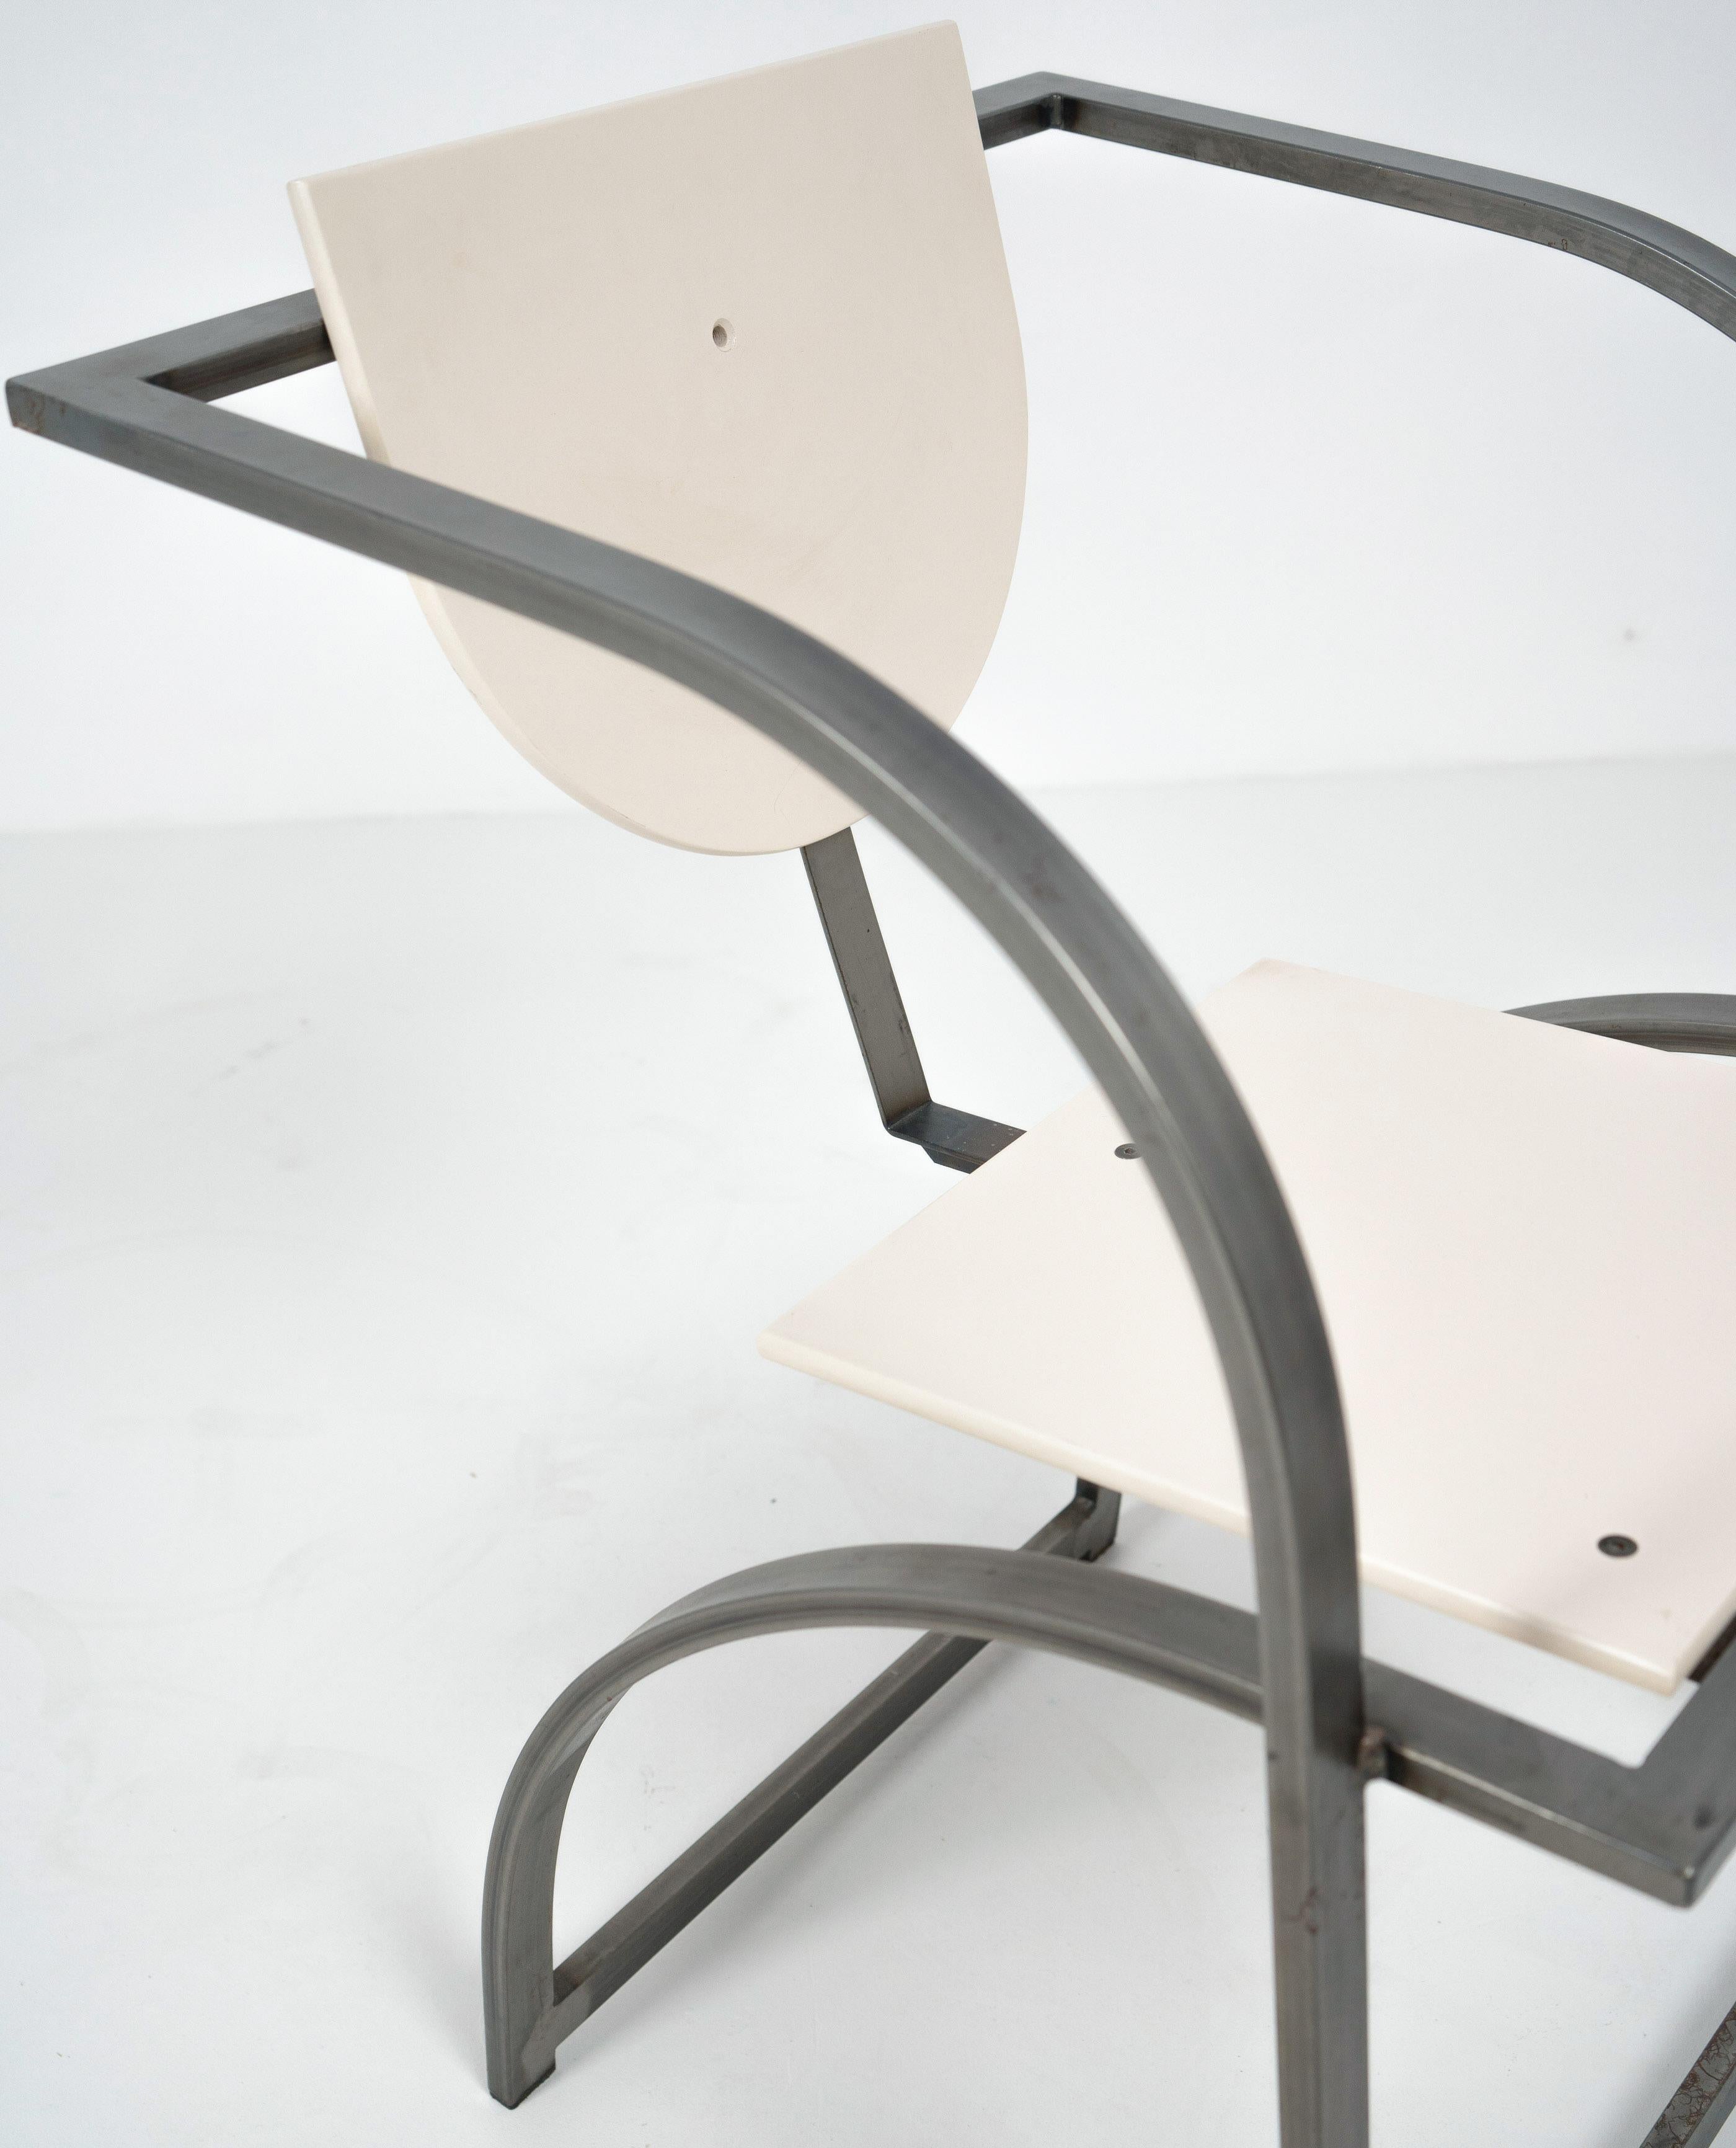 Late 20th Century Sinus Chair by Karl Friedrich Förster, c.1980 For Sale